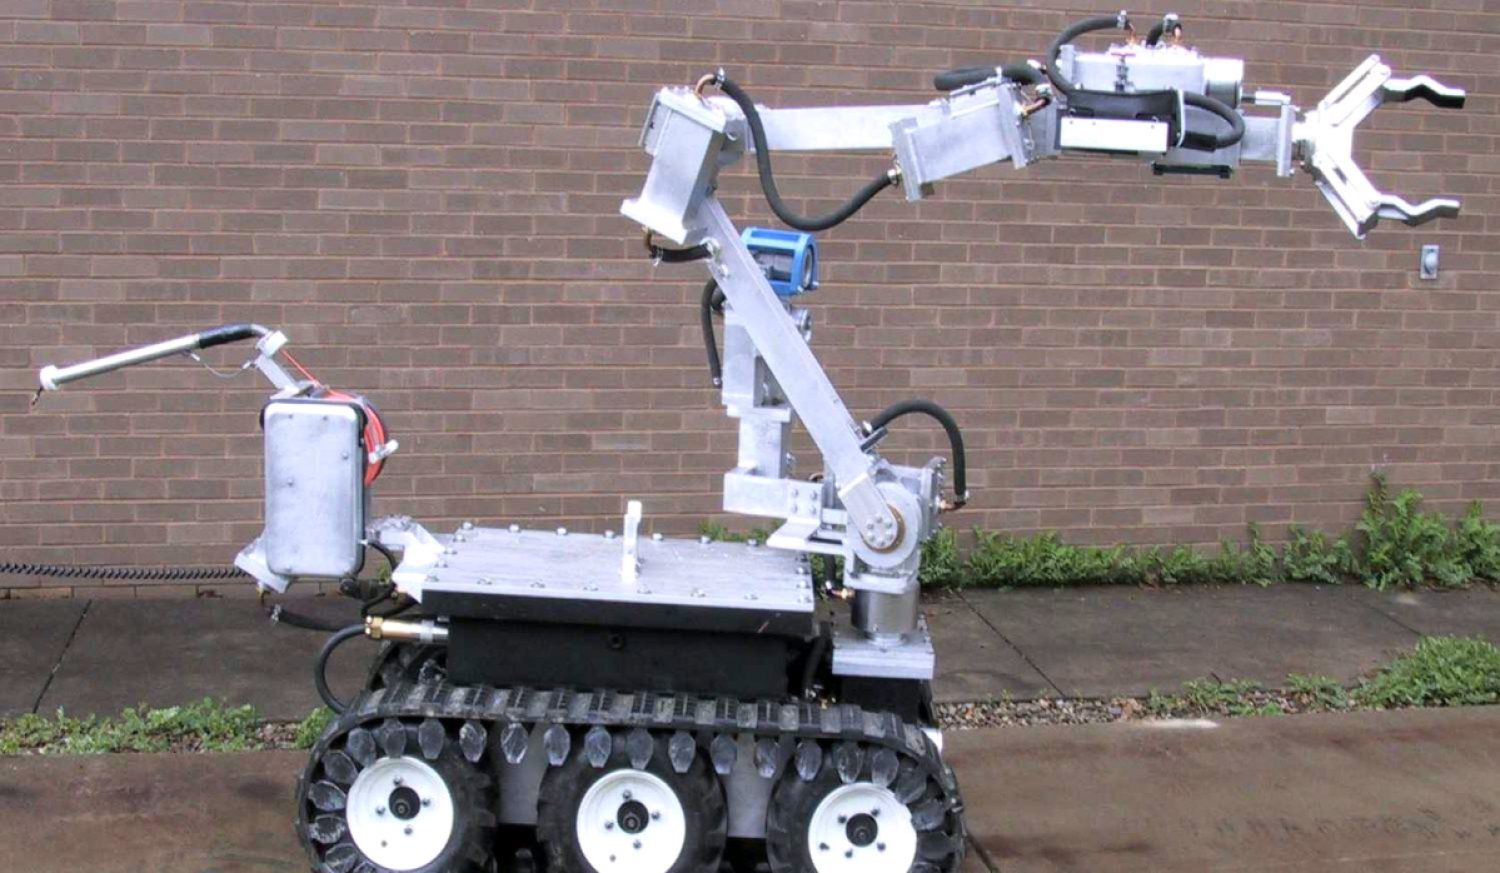 The ANDROS Wolverine V2 robot, a small white device with treads and a long gripper arm.